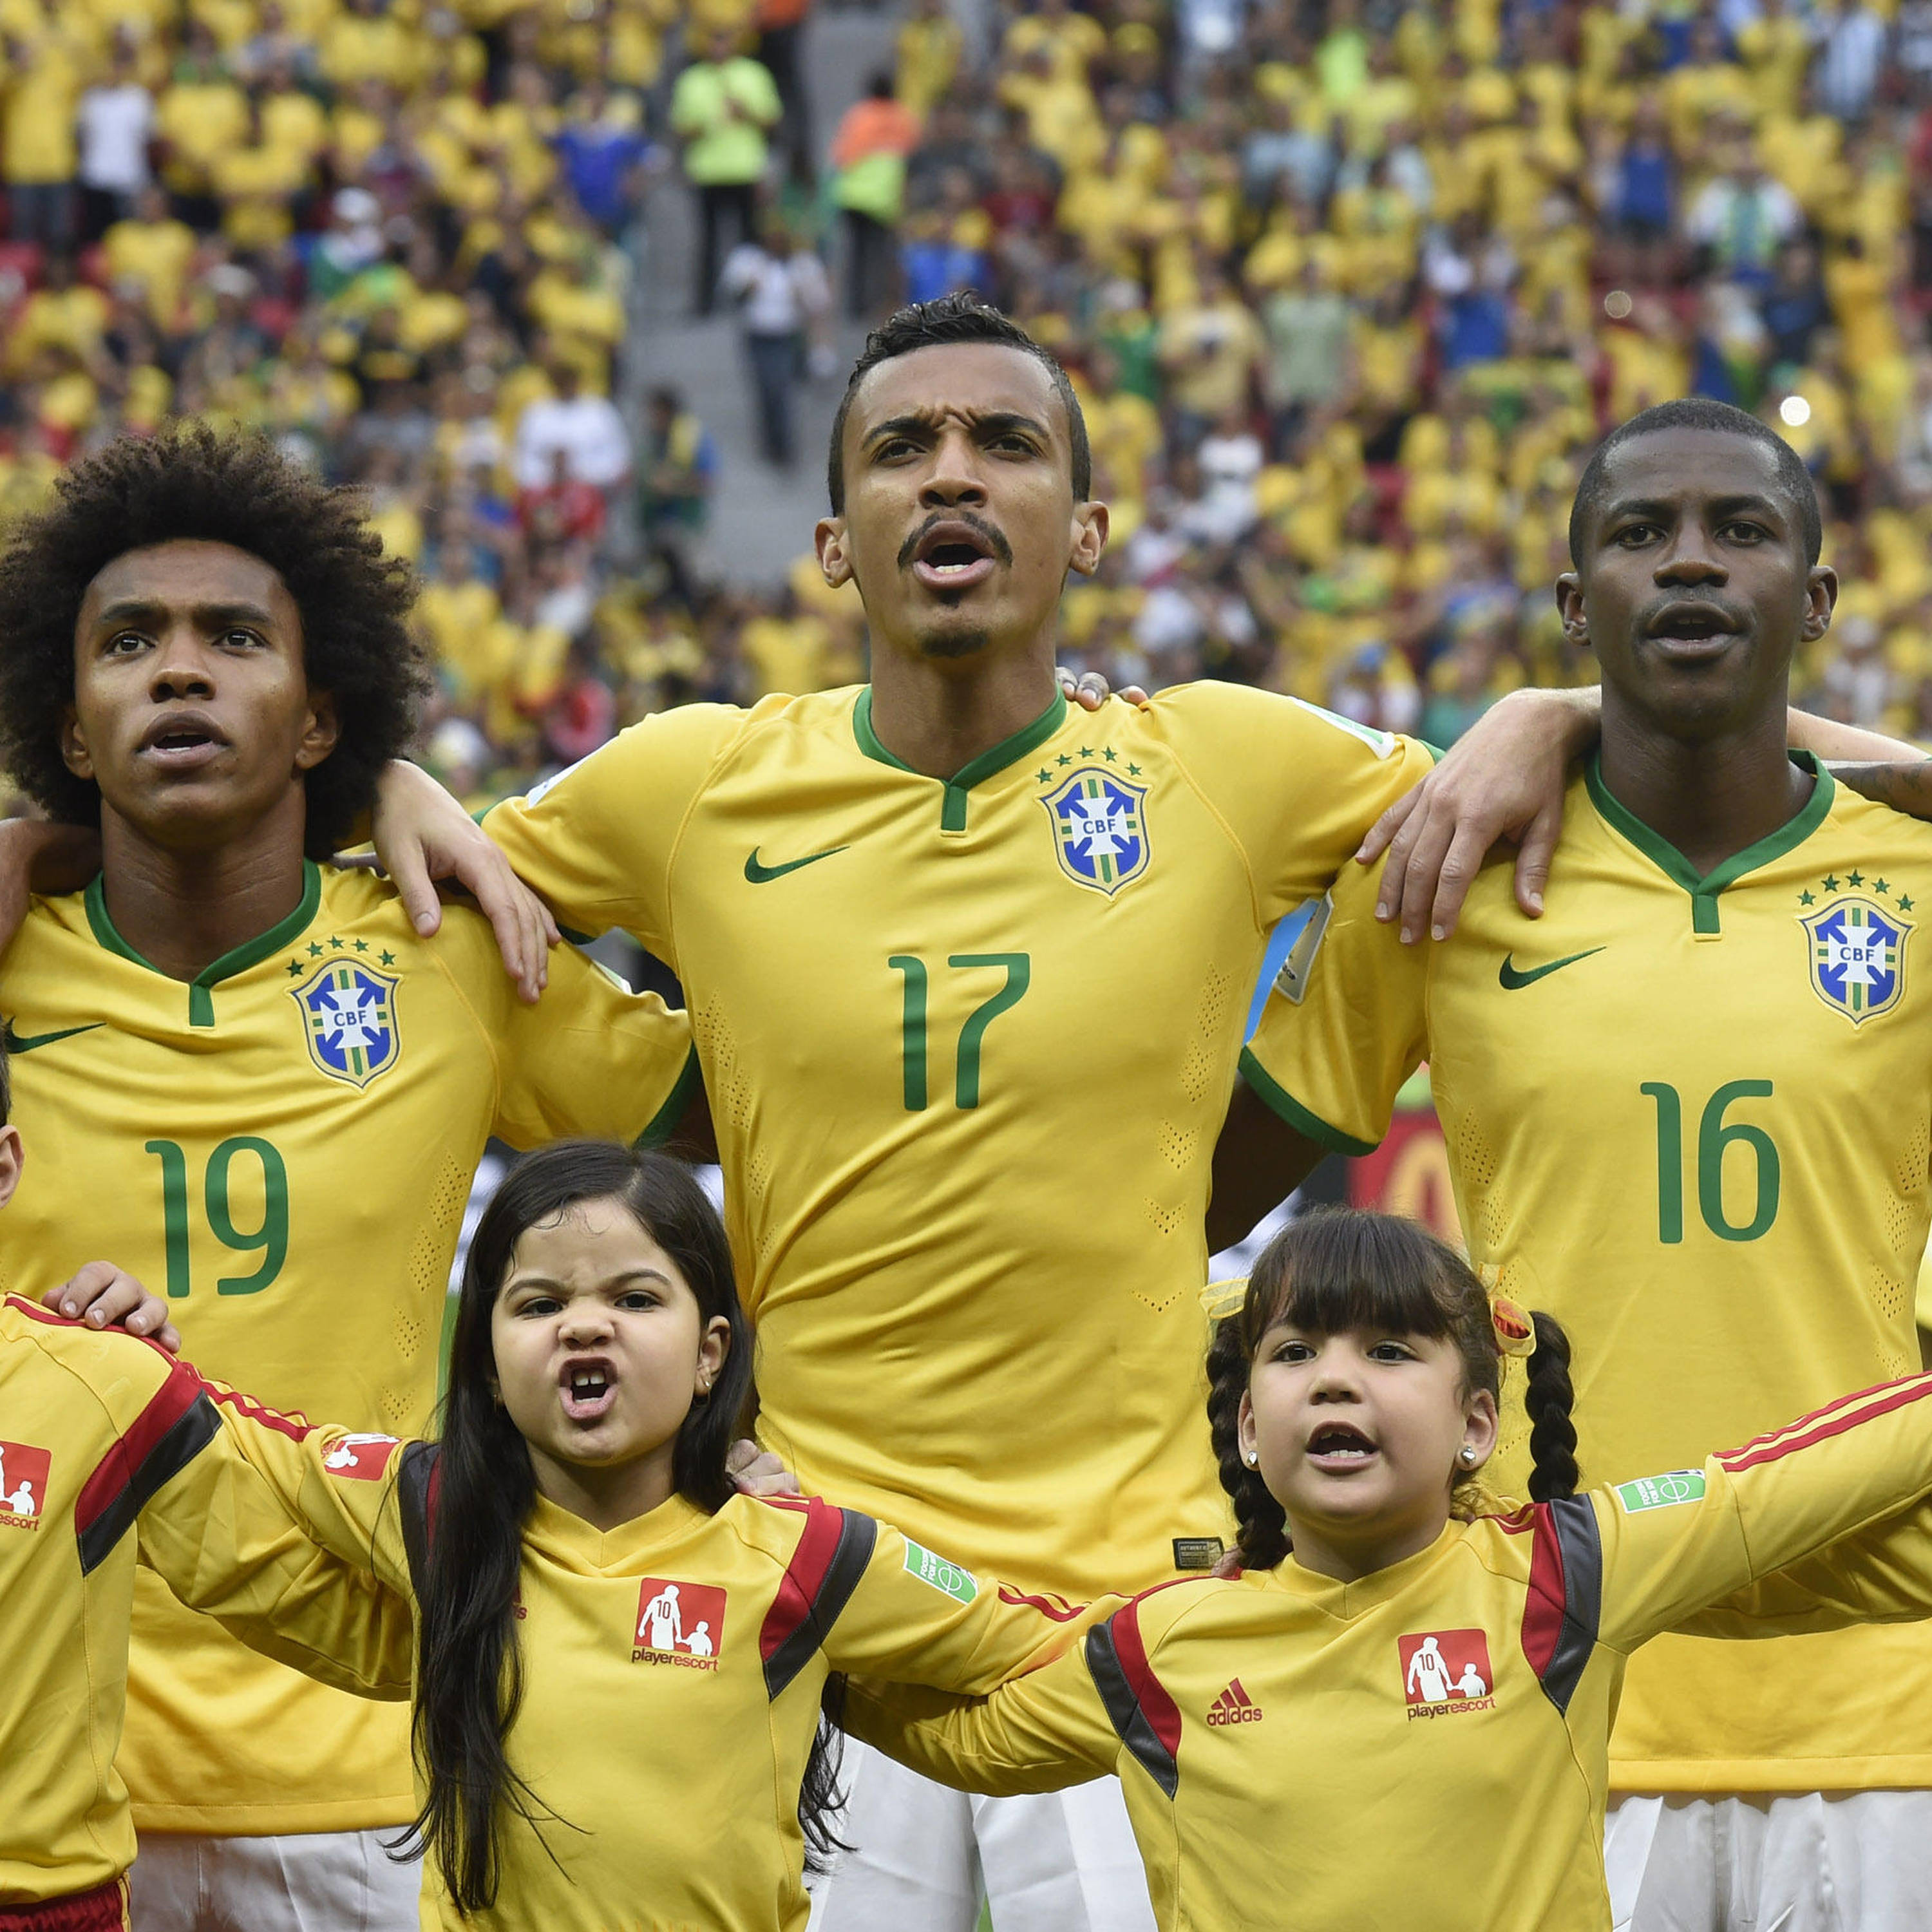 All National Anthems played at the FIFA World Cup 2022 